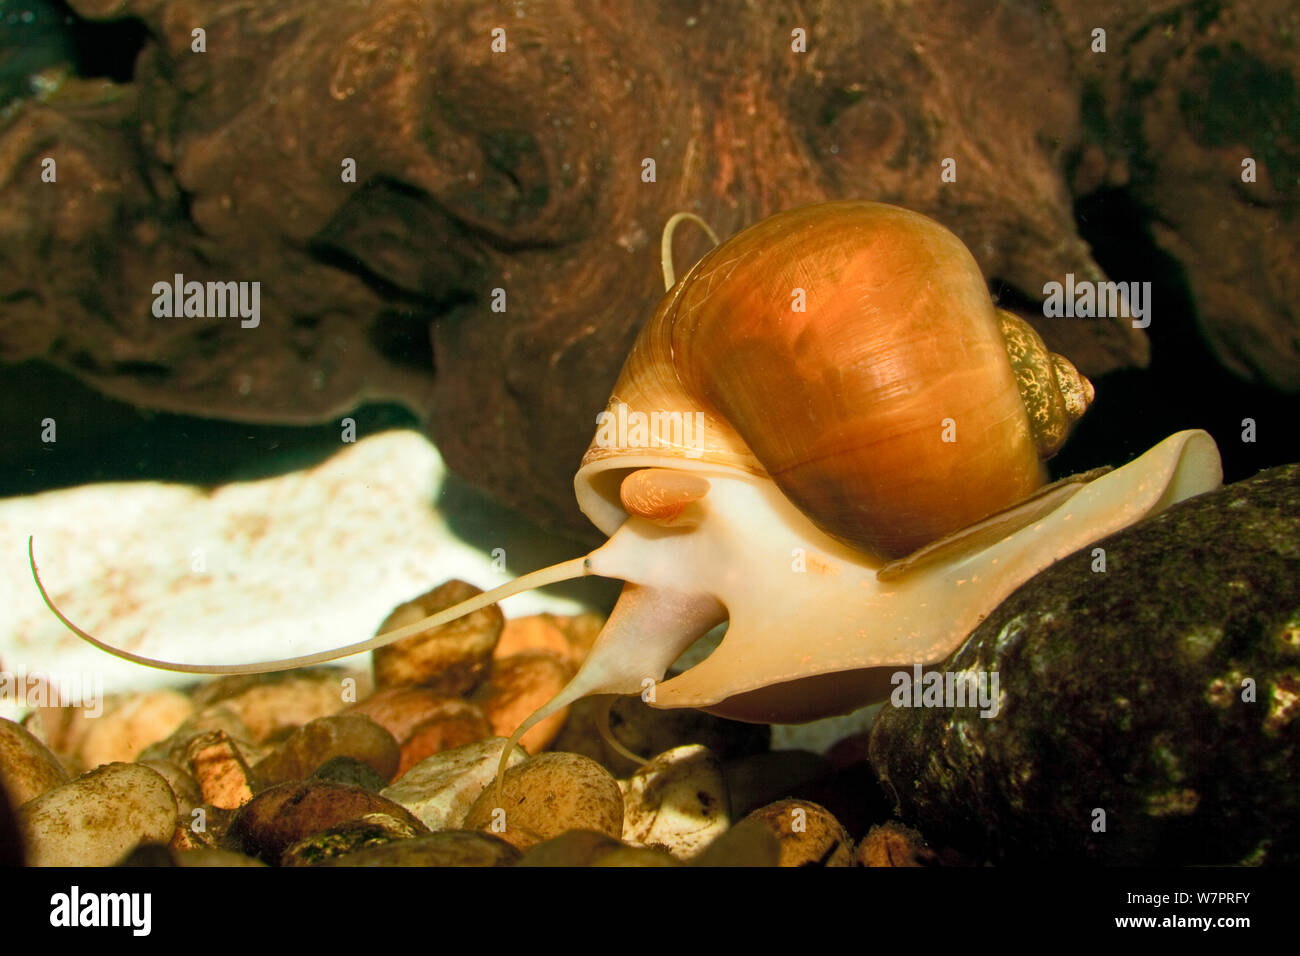 Apple Snail (Pomacea sp) feeding under water captive, from the Americas Stock Photo